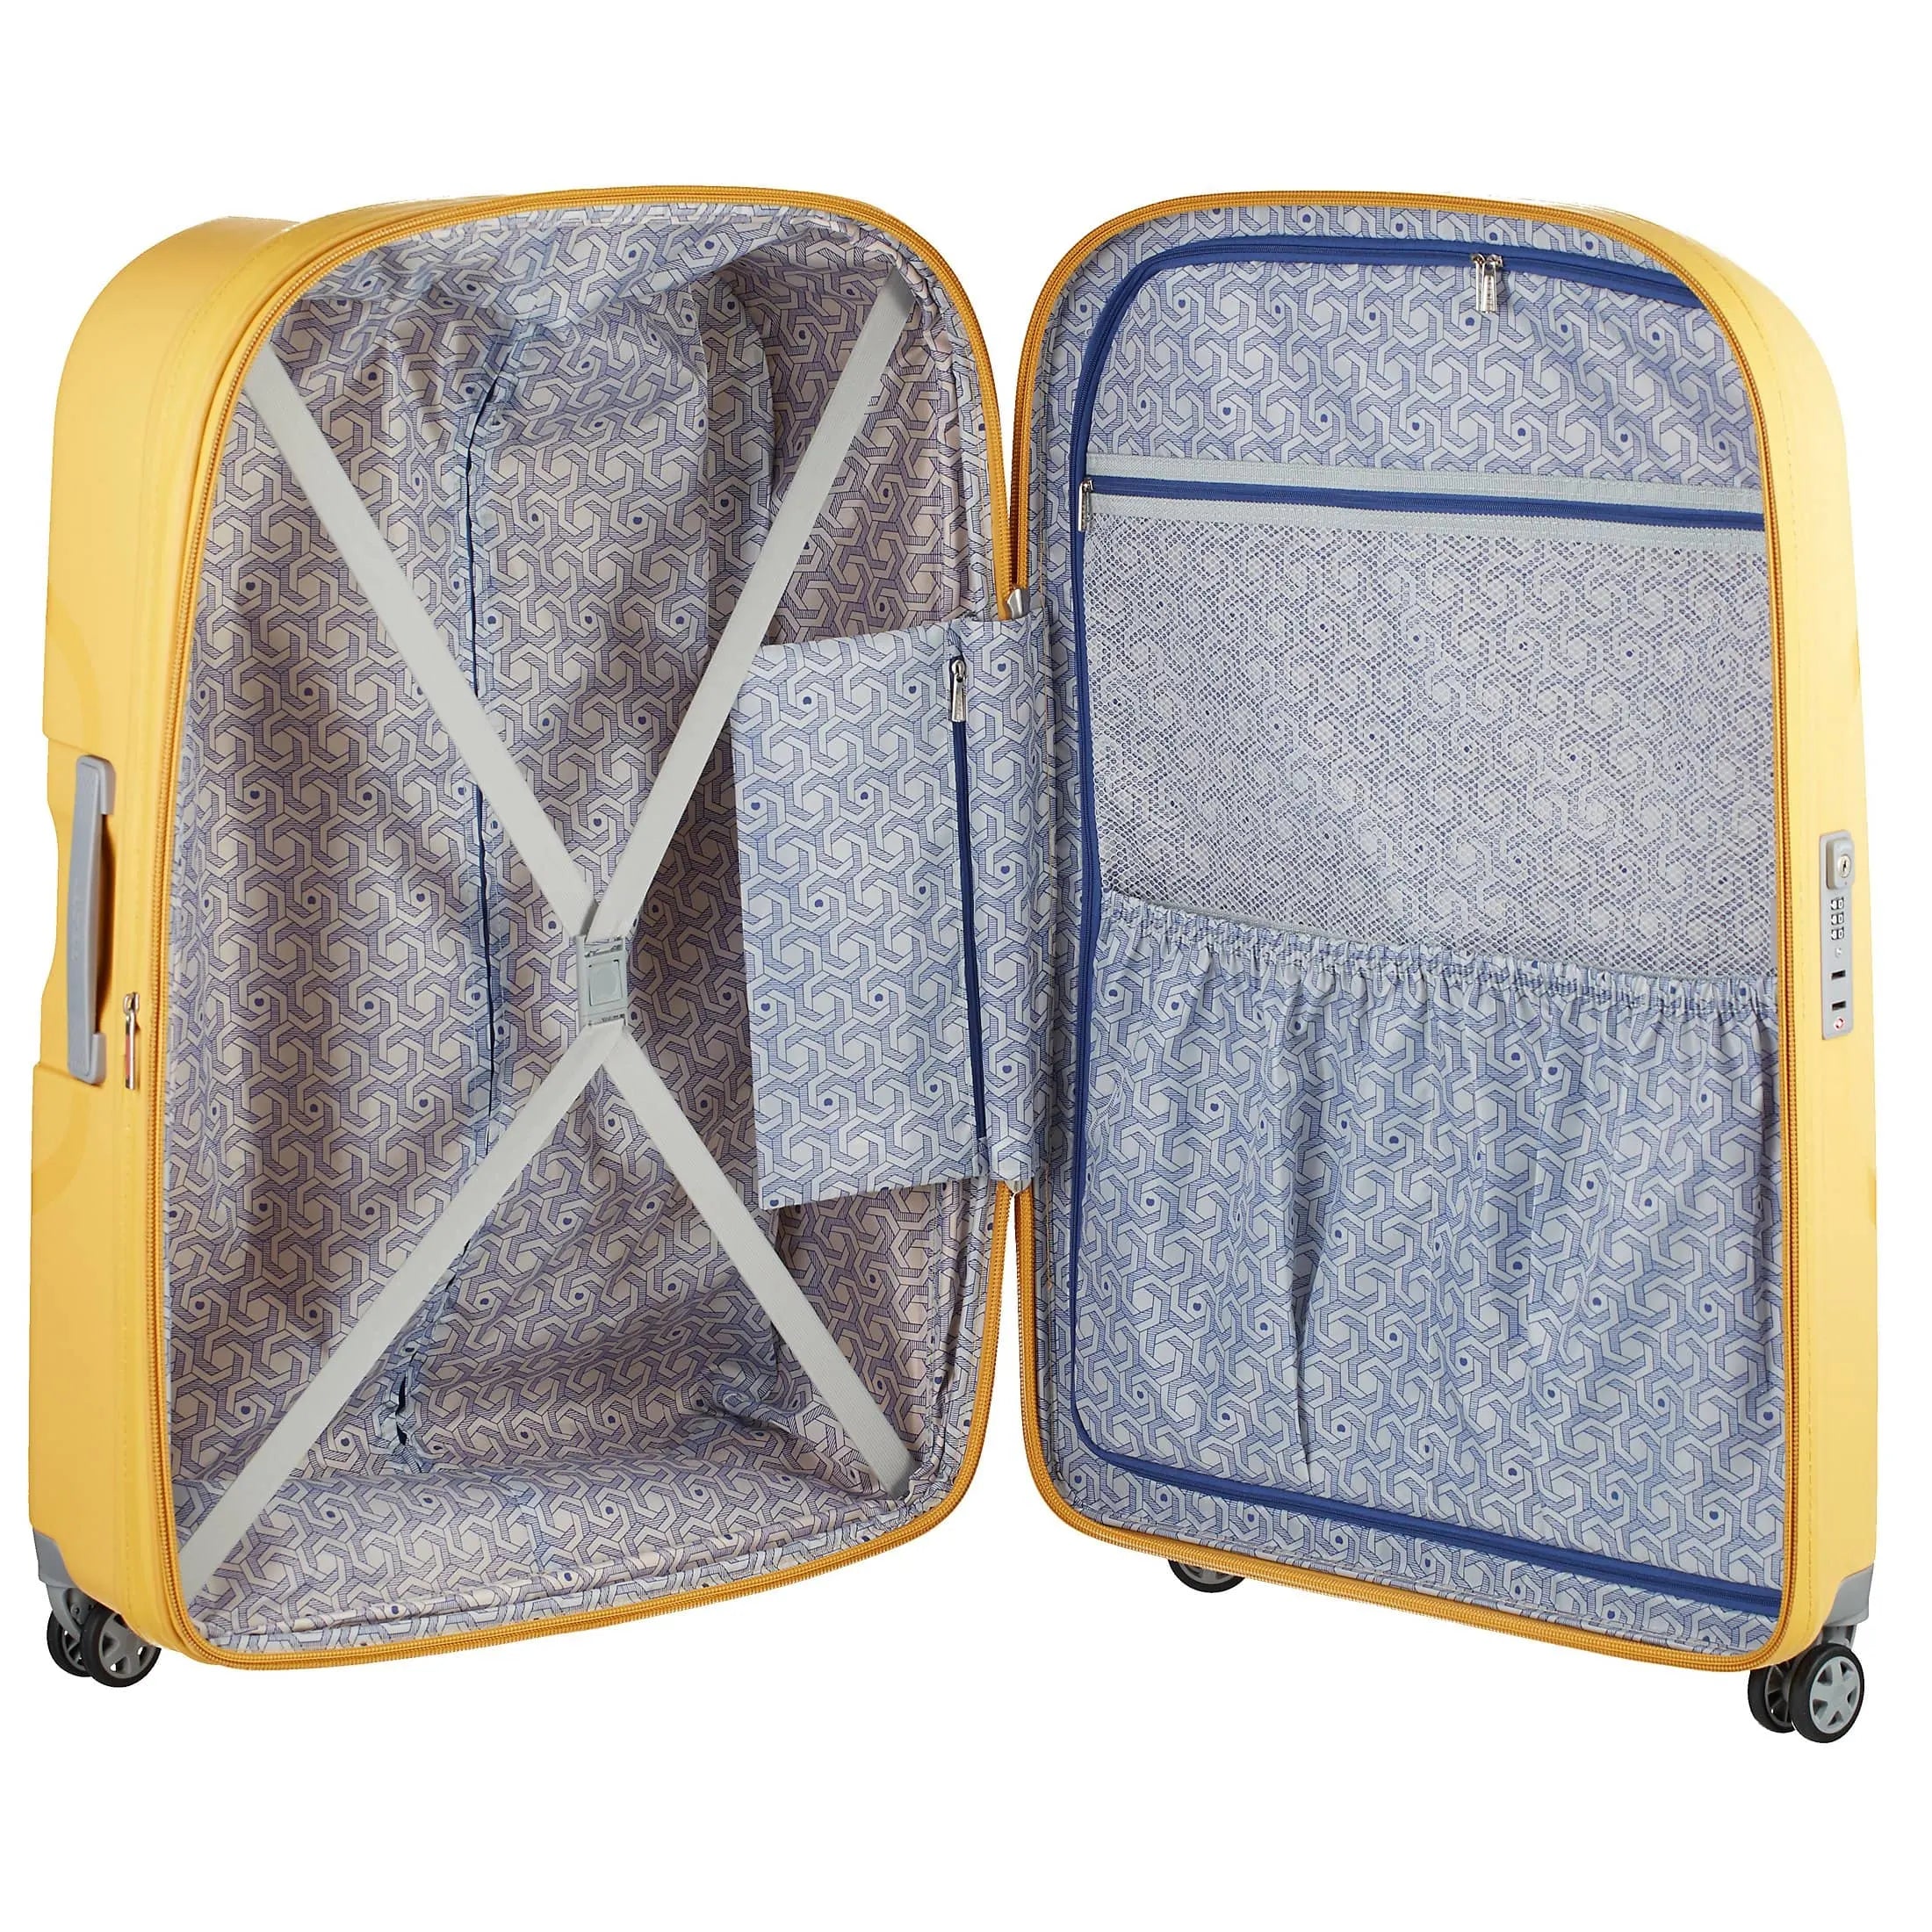 Delsey Clavel trolley 4 roues 76 cm - jaune